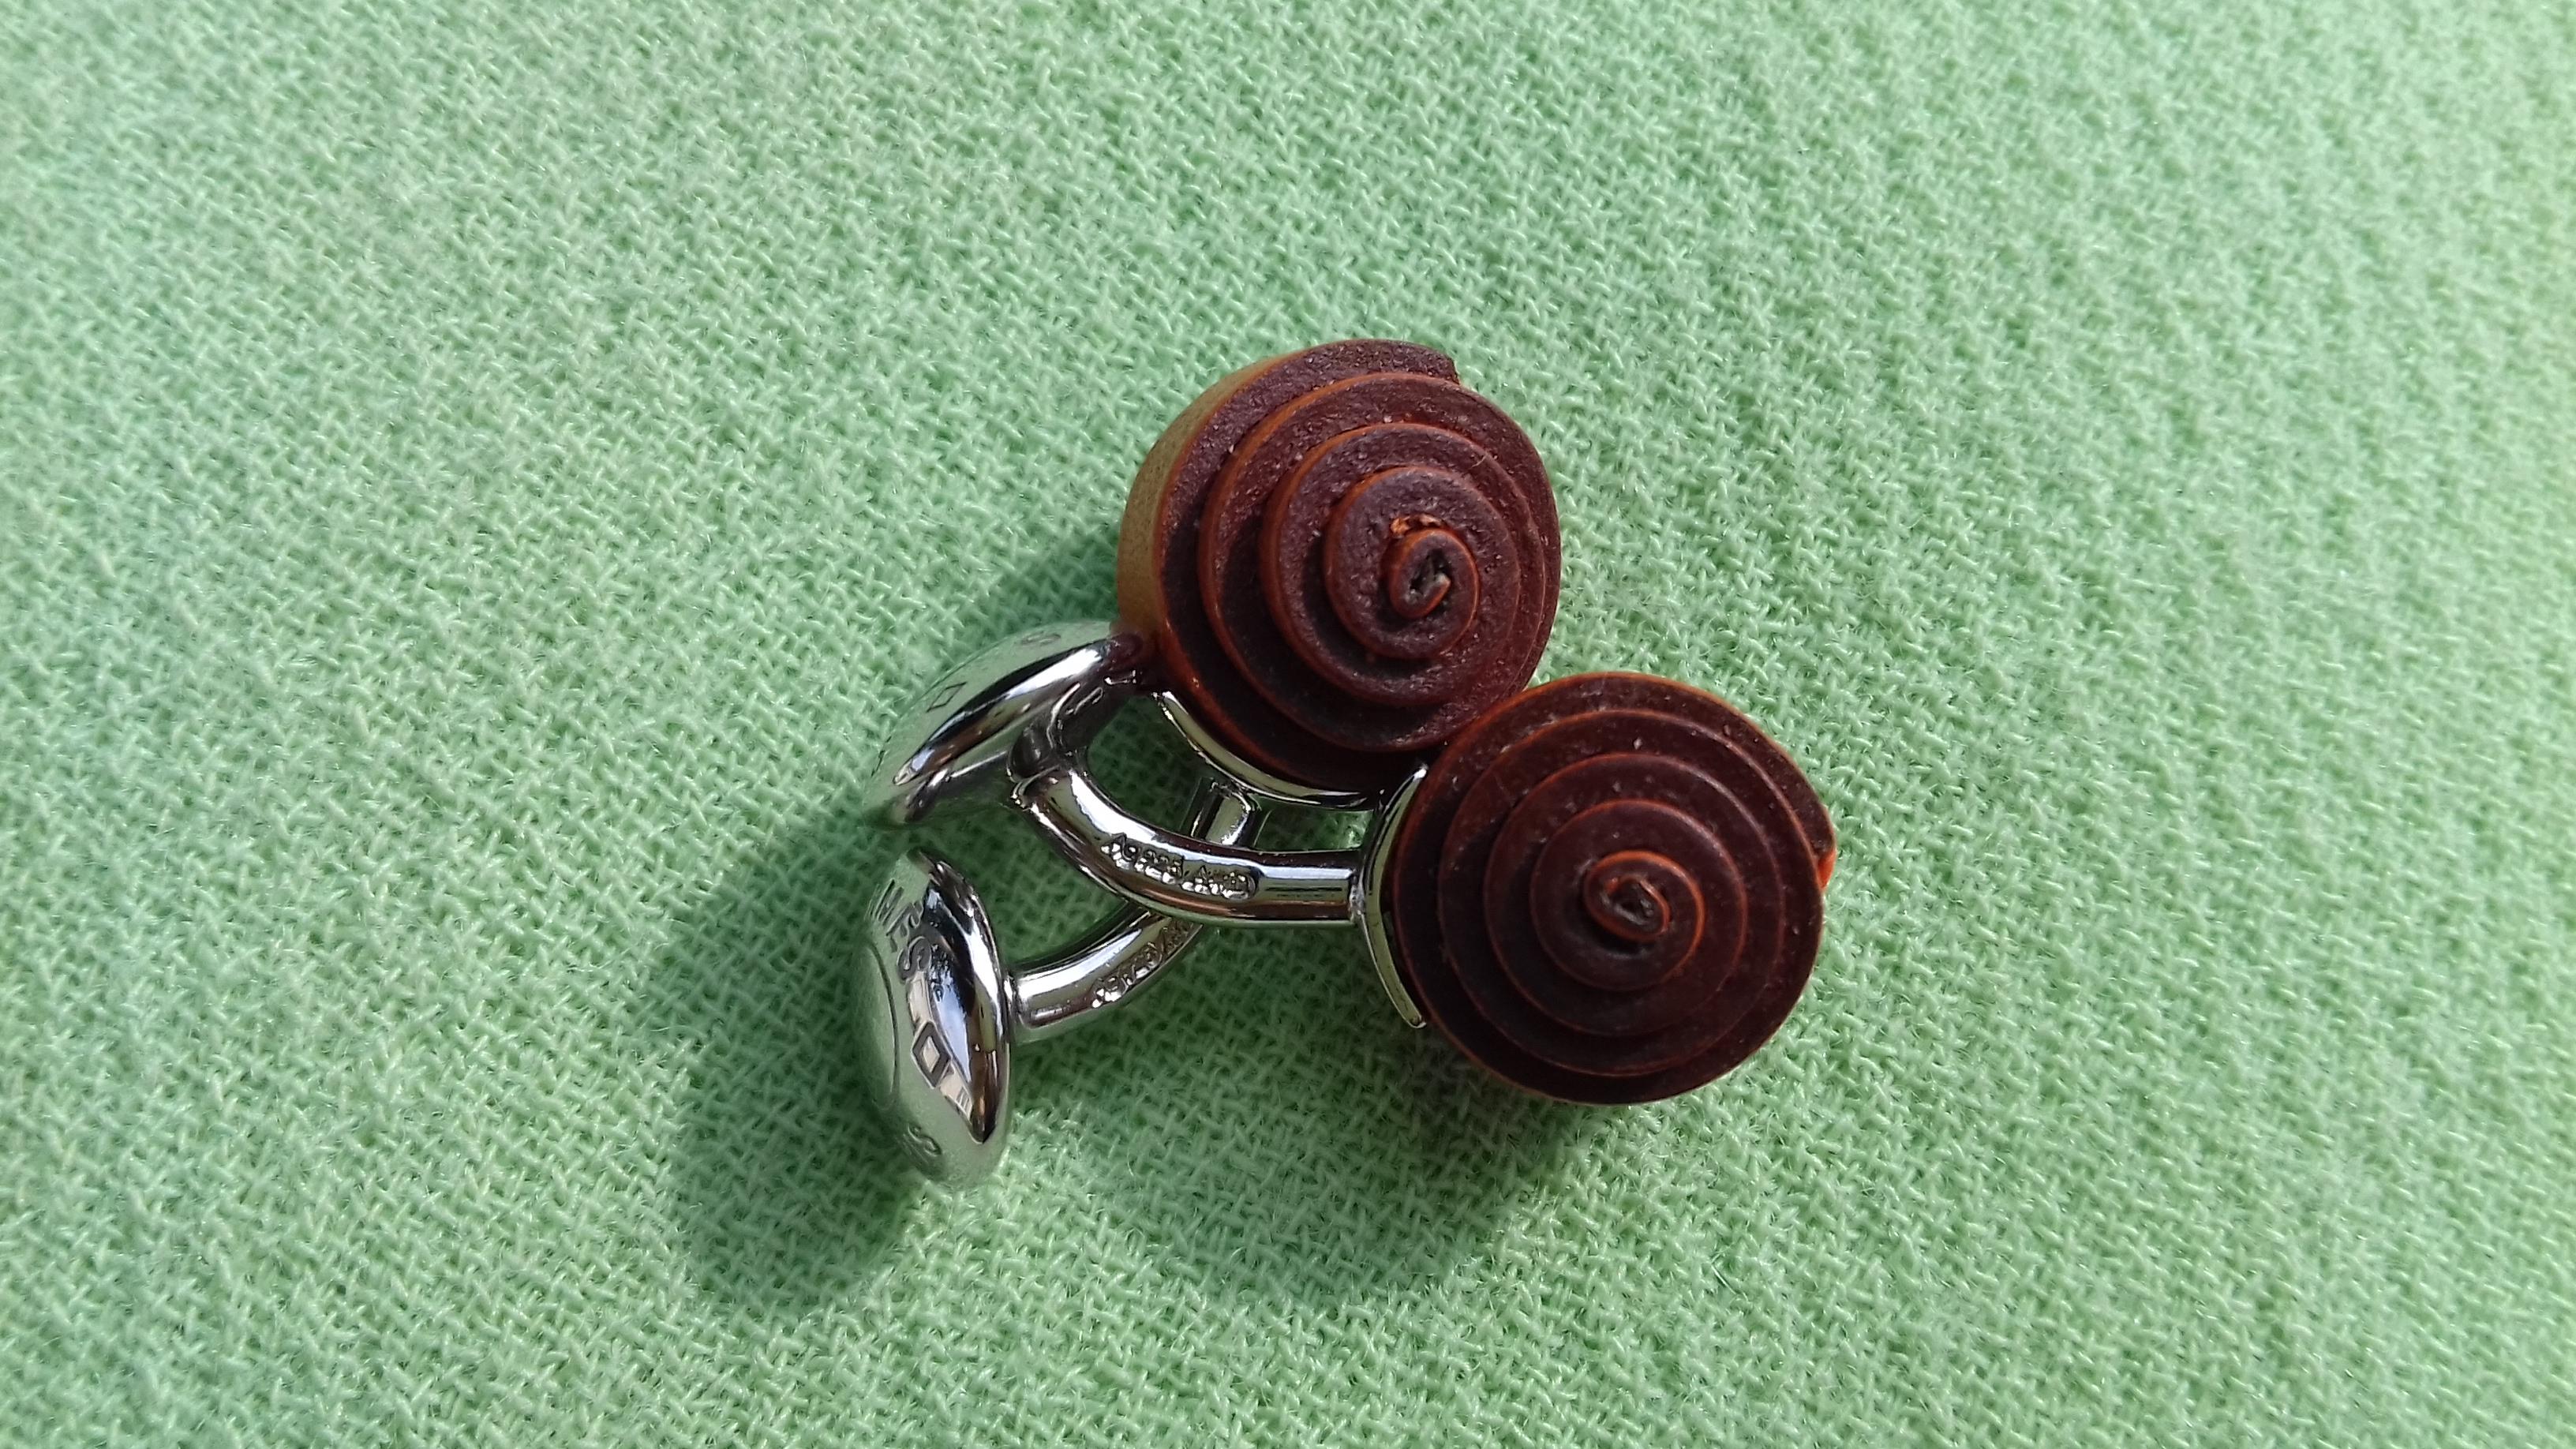 Hermès Coiled Leather and Sterling Silver Cuffs Button Snail Shaped Cufflinks  16